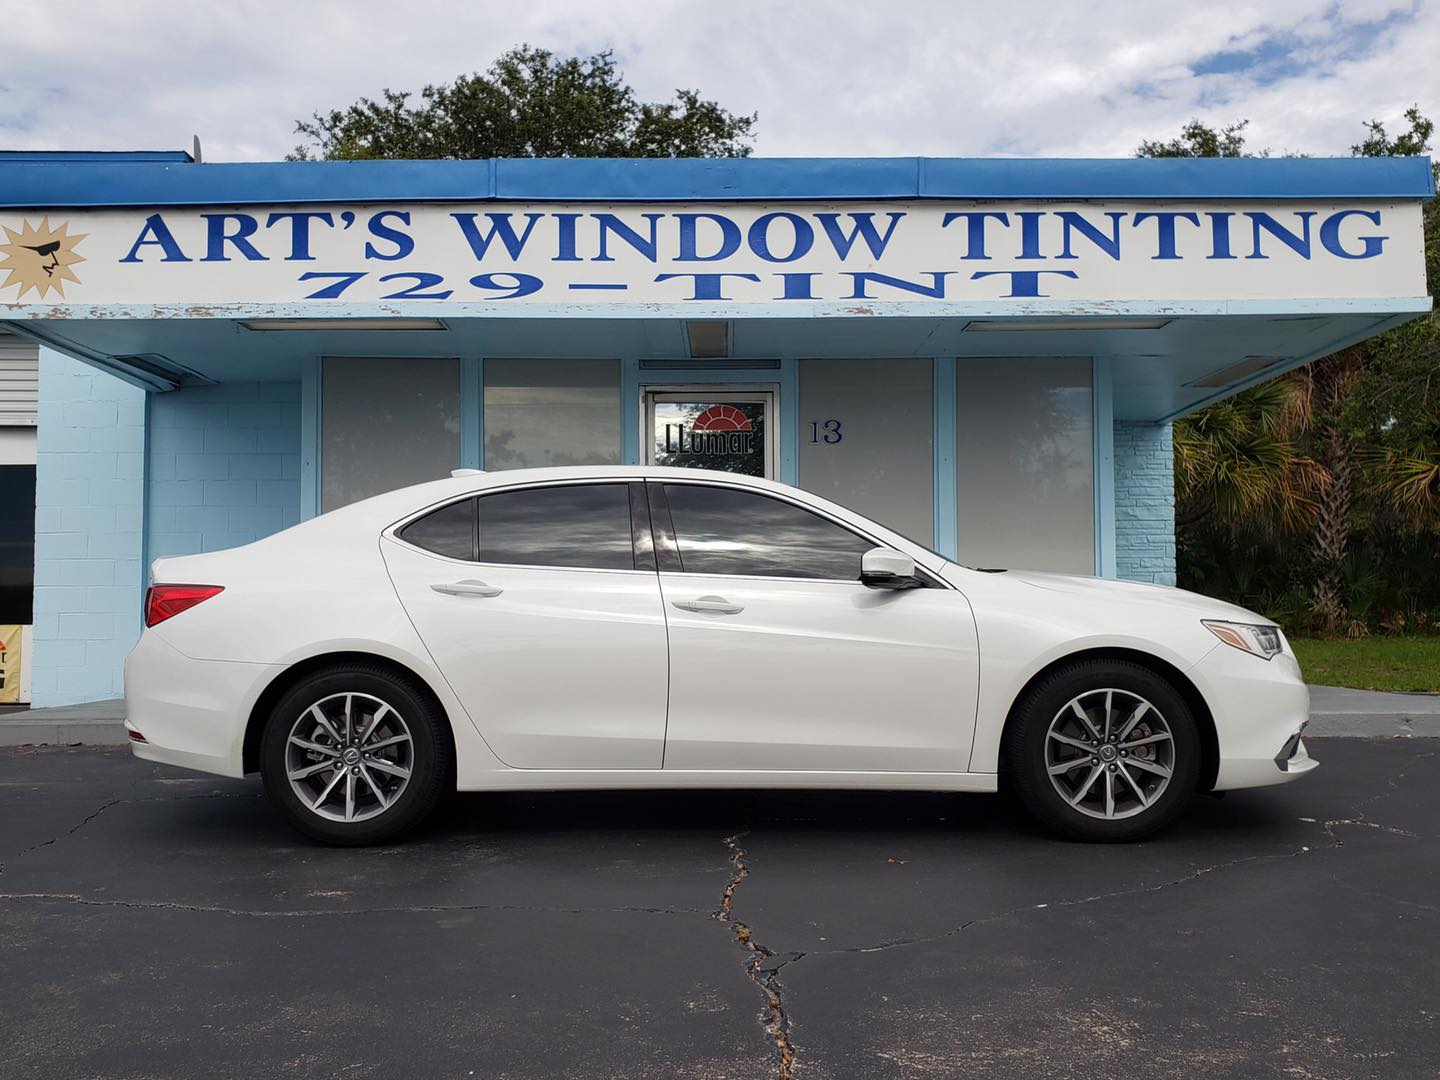 About Art's Window Tinting Window Tinting Service in